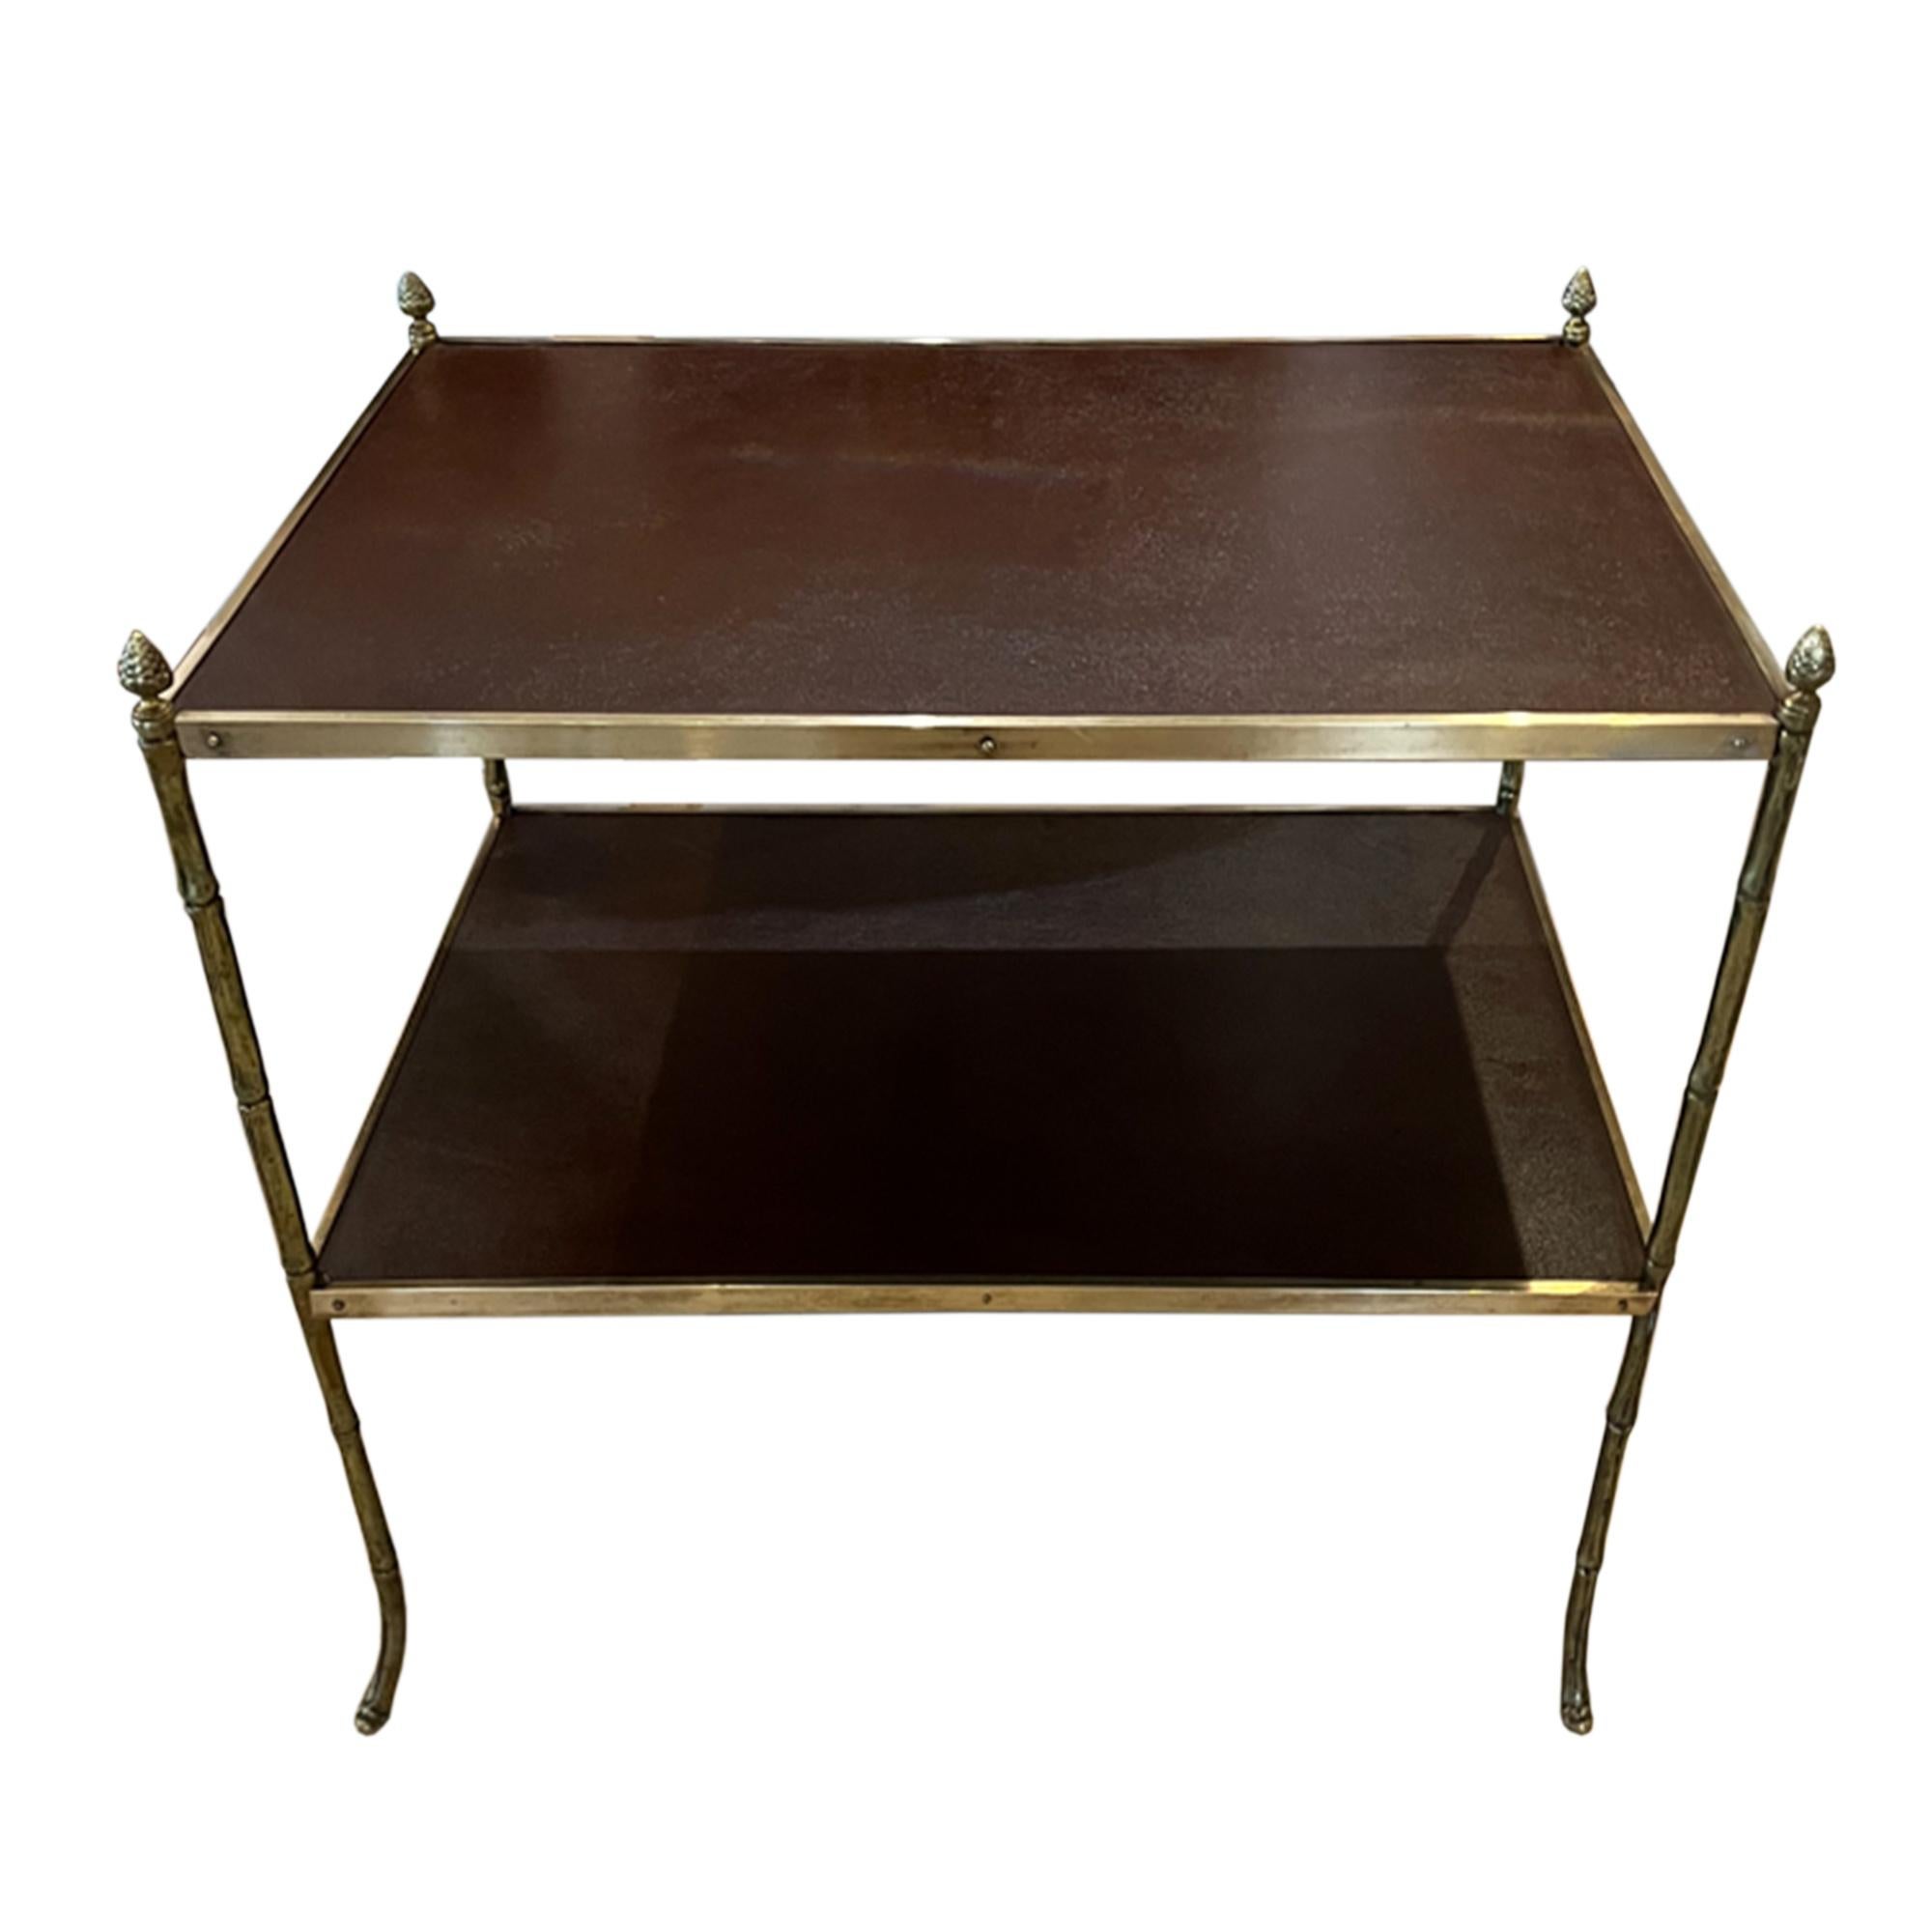 This pair of mid century side tables were made in France in the 1950s.

Made from brass using a faux bamboo design with elegant, sweeping legs, brown leather tops and pine cone finials. 

The height of the top shelf is 56cm and the lower shelf